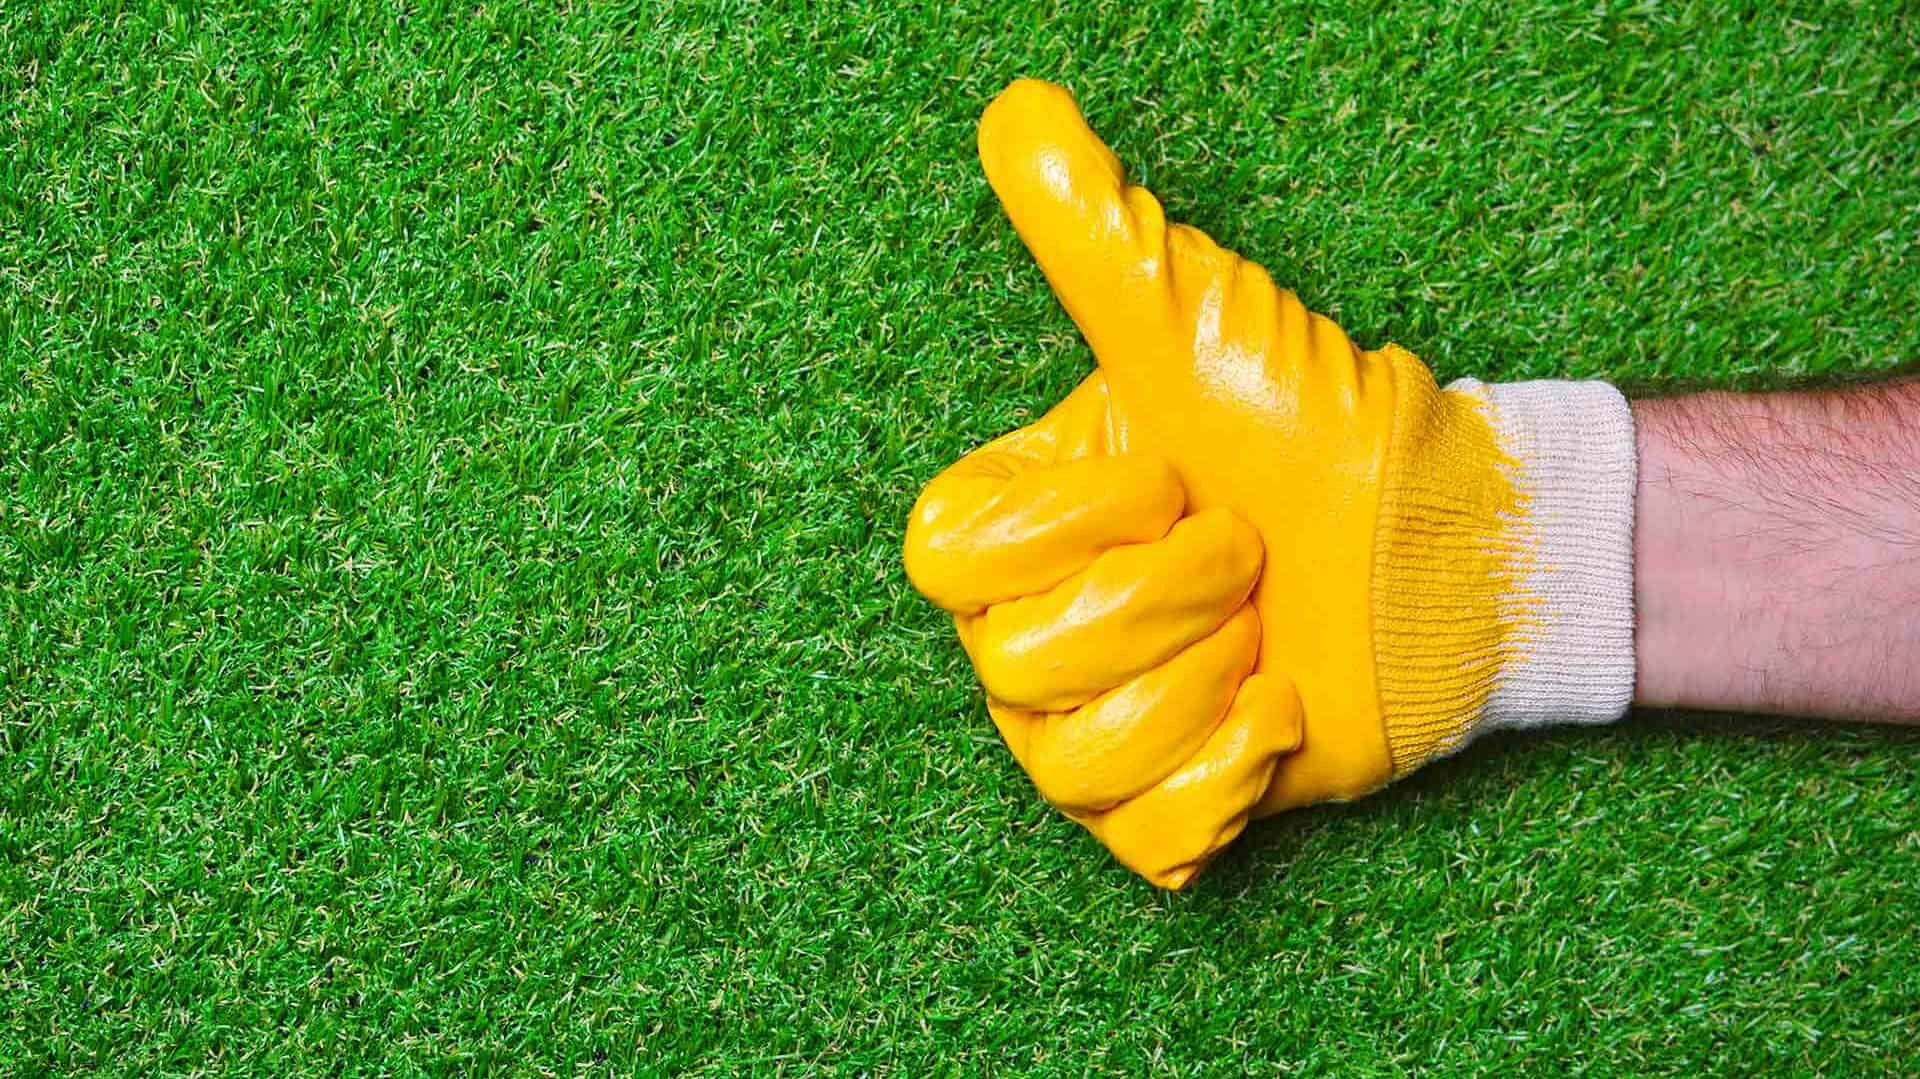 Thumbs Up Hand with Glove on Artificial Turf